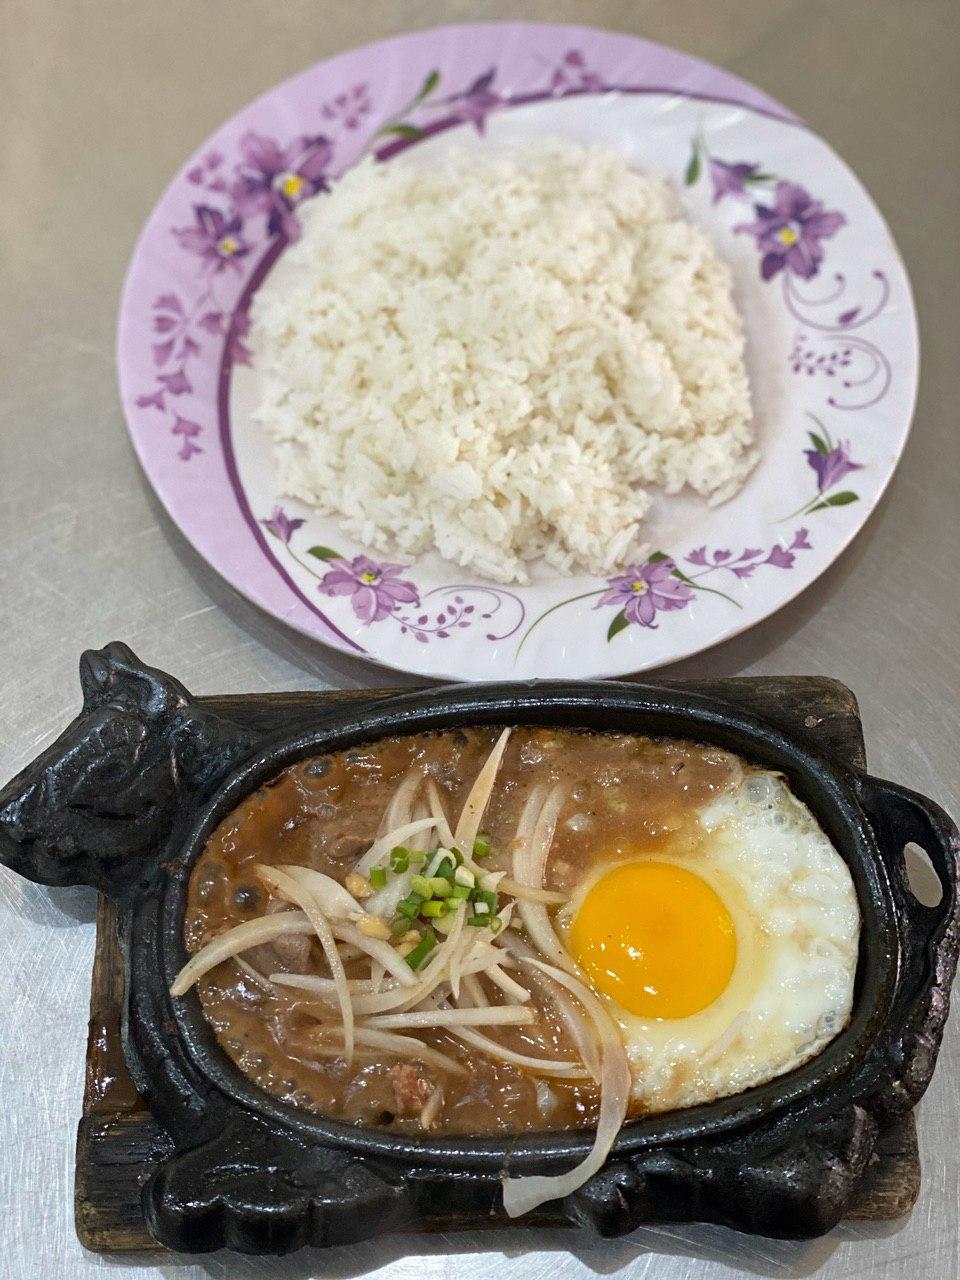 05.Beef on Hot Pan with Rice (Extra Beef)